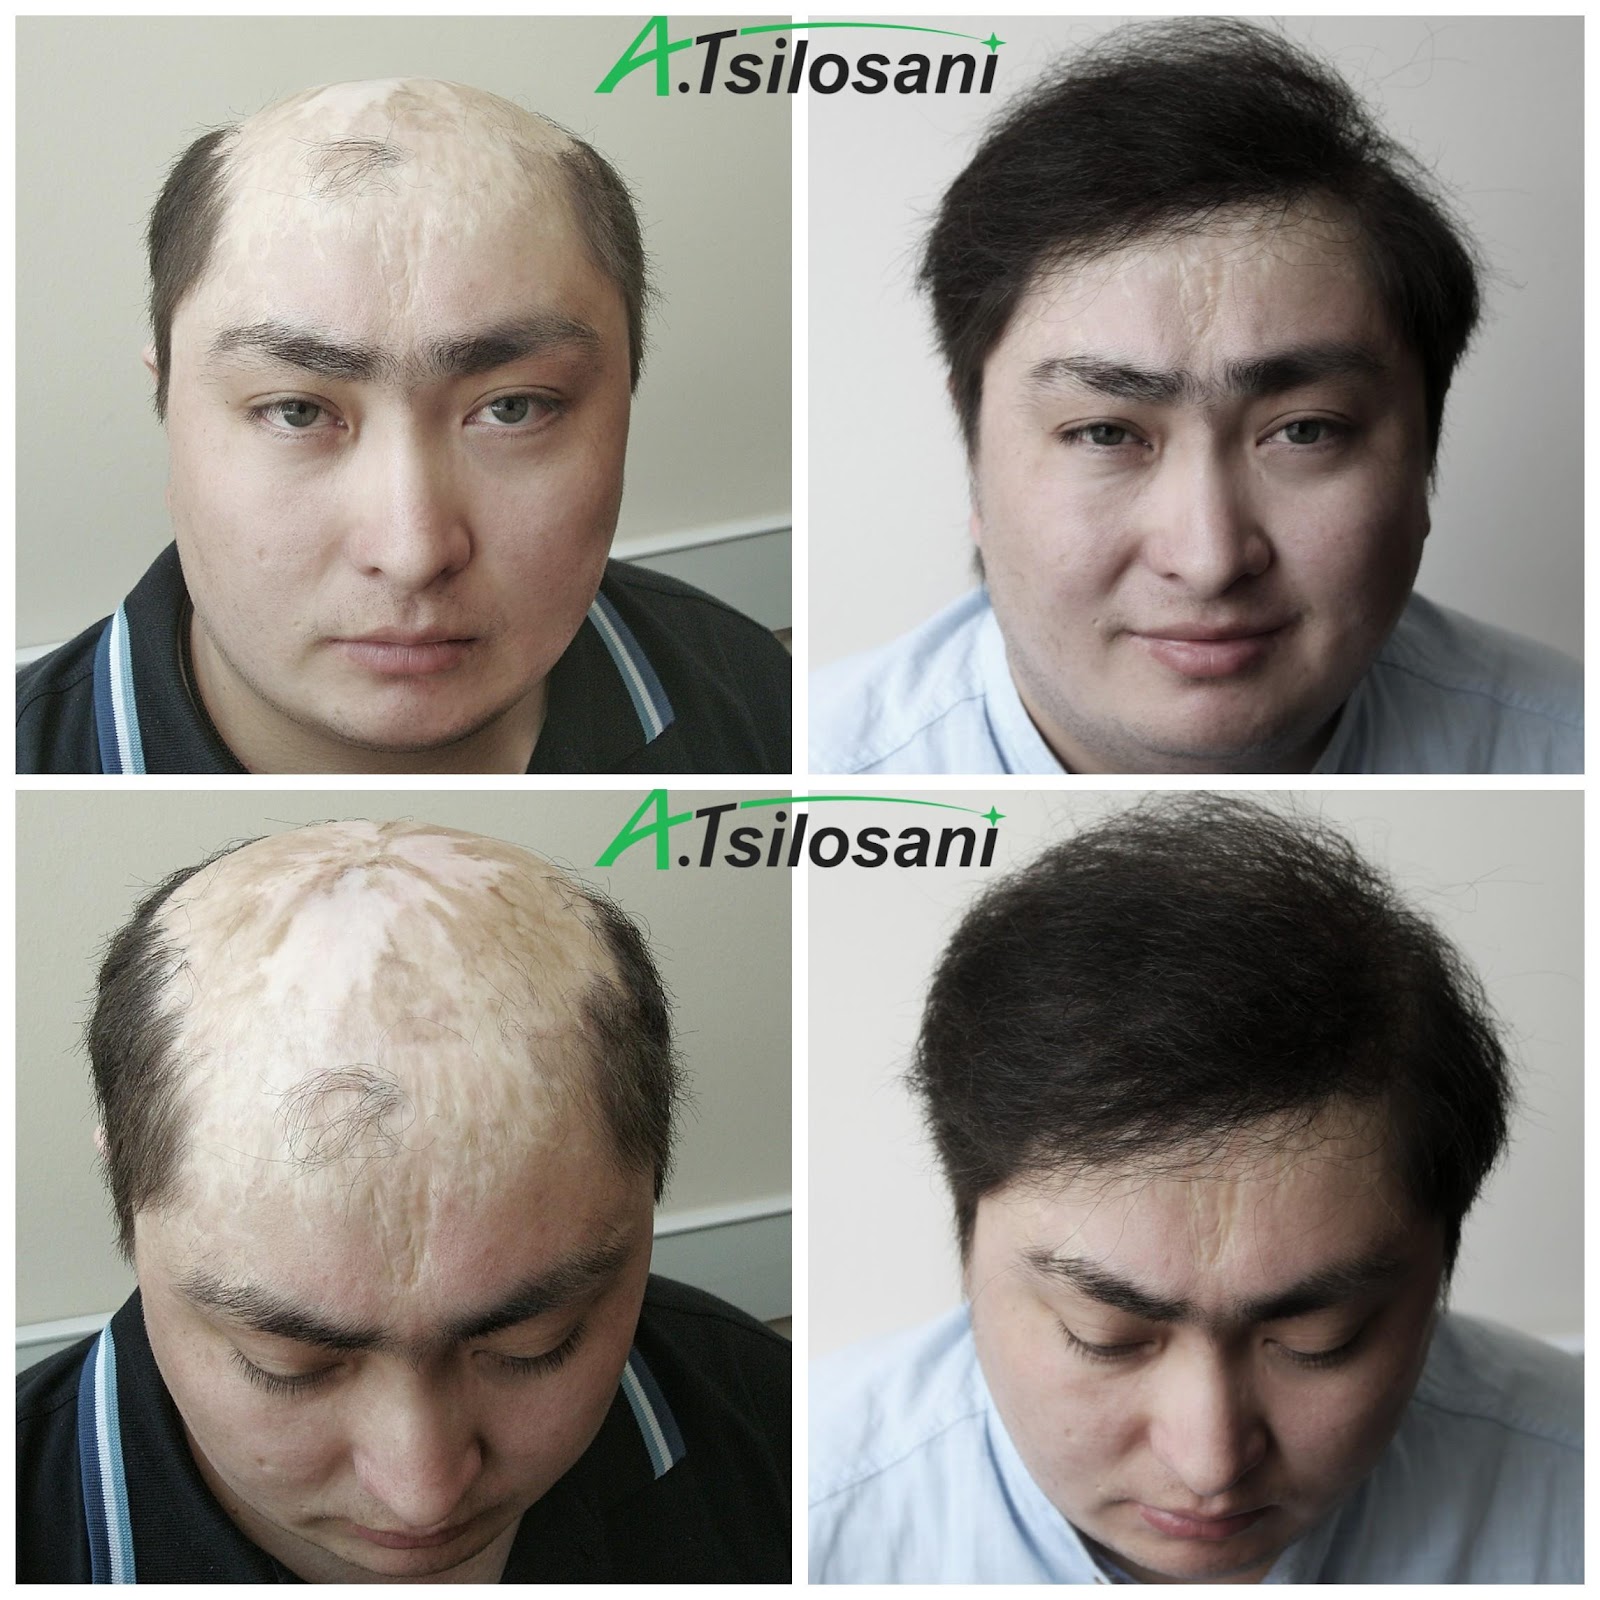 Foto%2012.%20Hair%20transplant%20before%20and%20after%205000%20grafts%20with%20FUT%20method%20